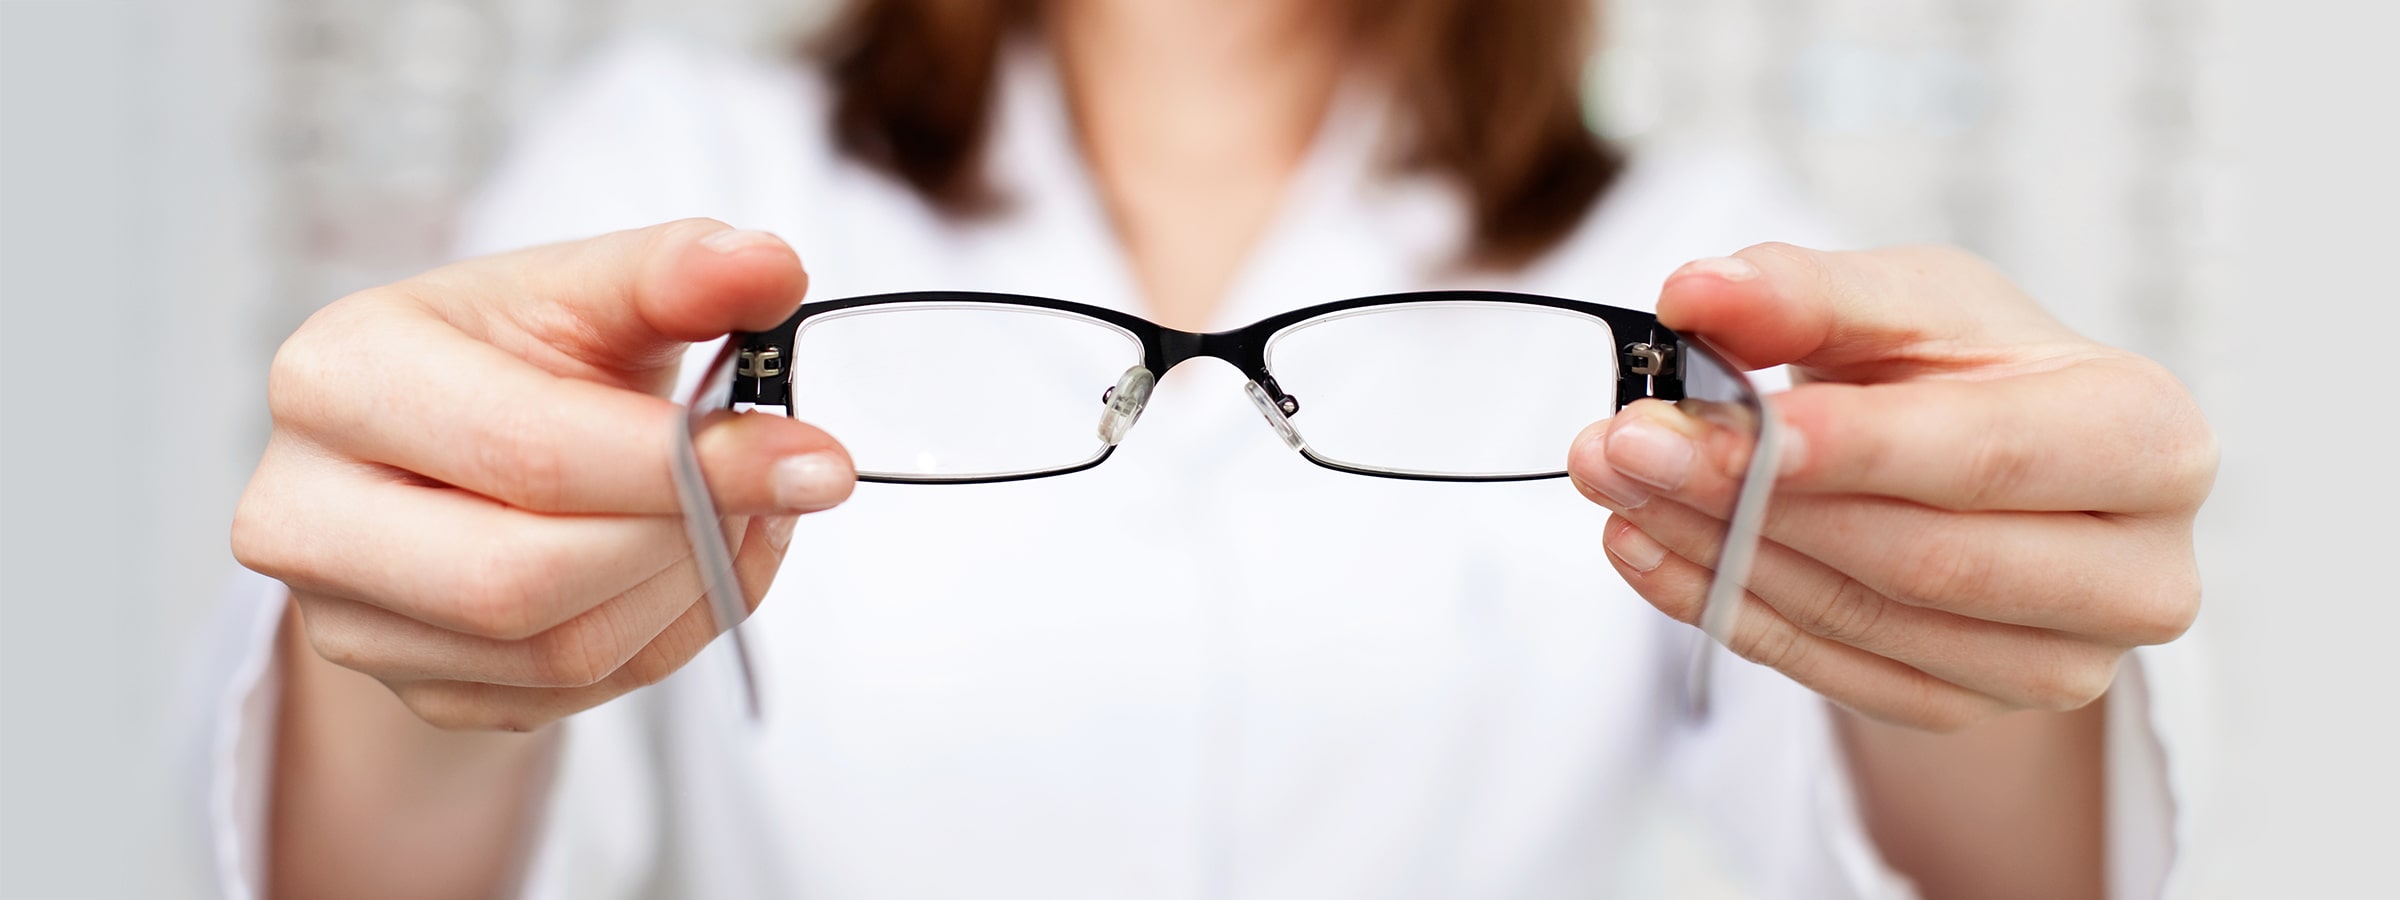 A woman holding up a pair of glasses